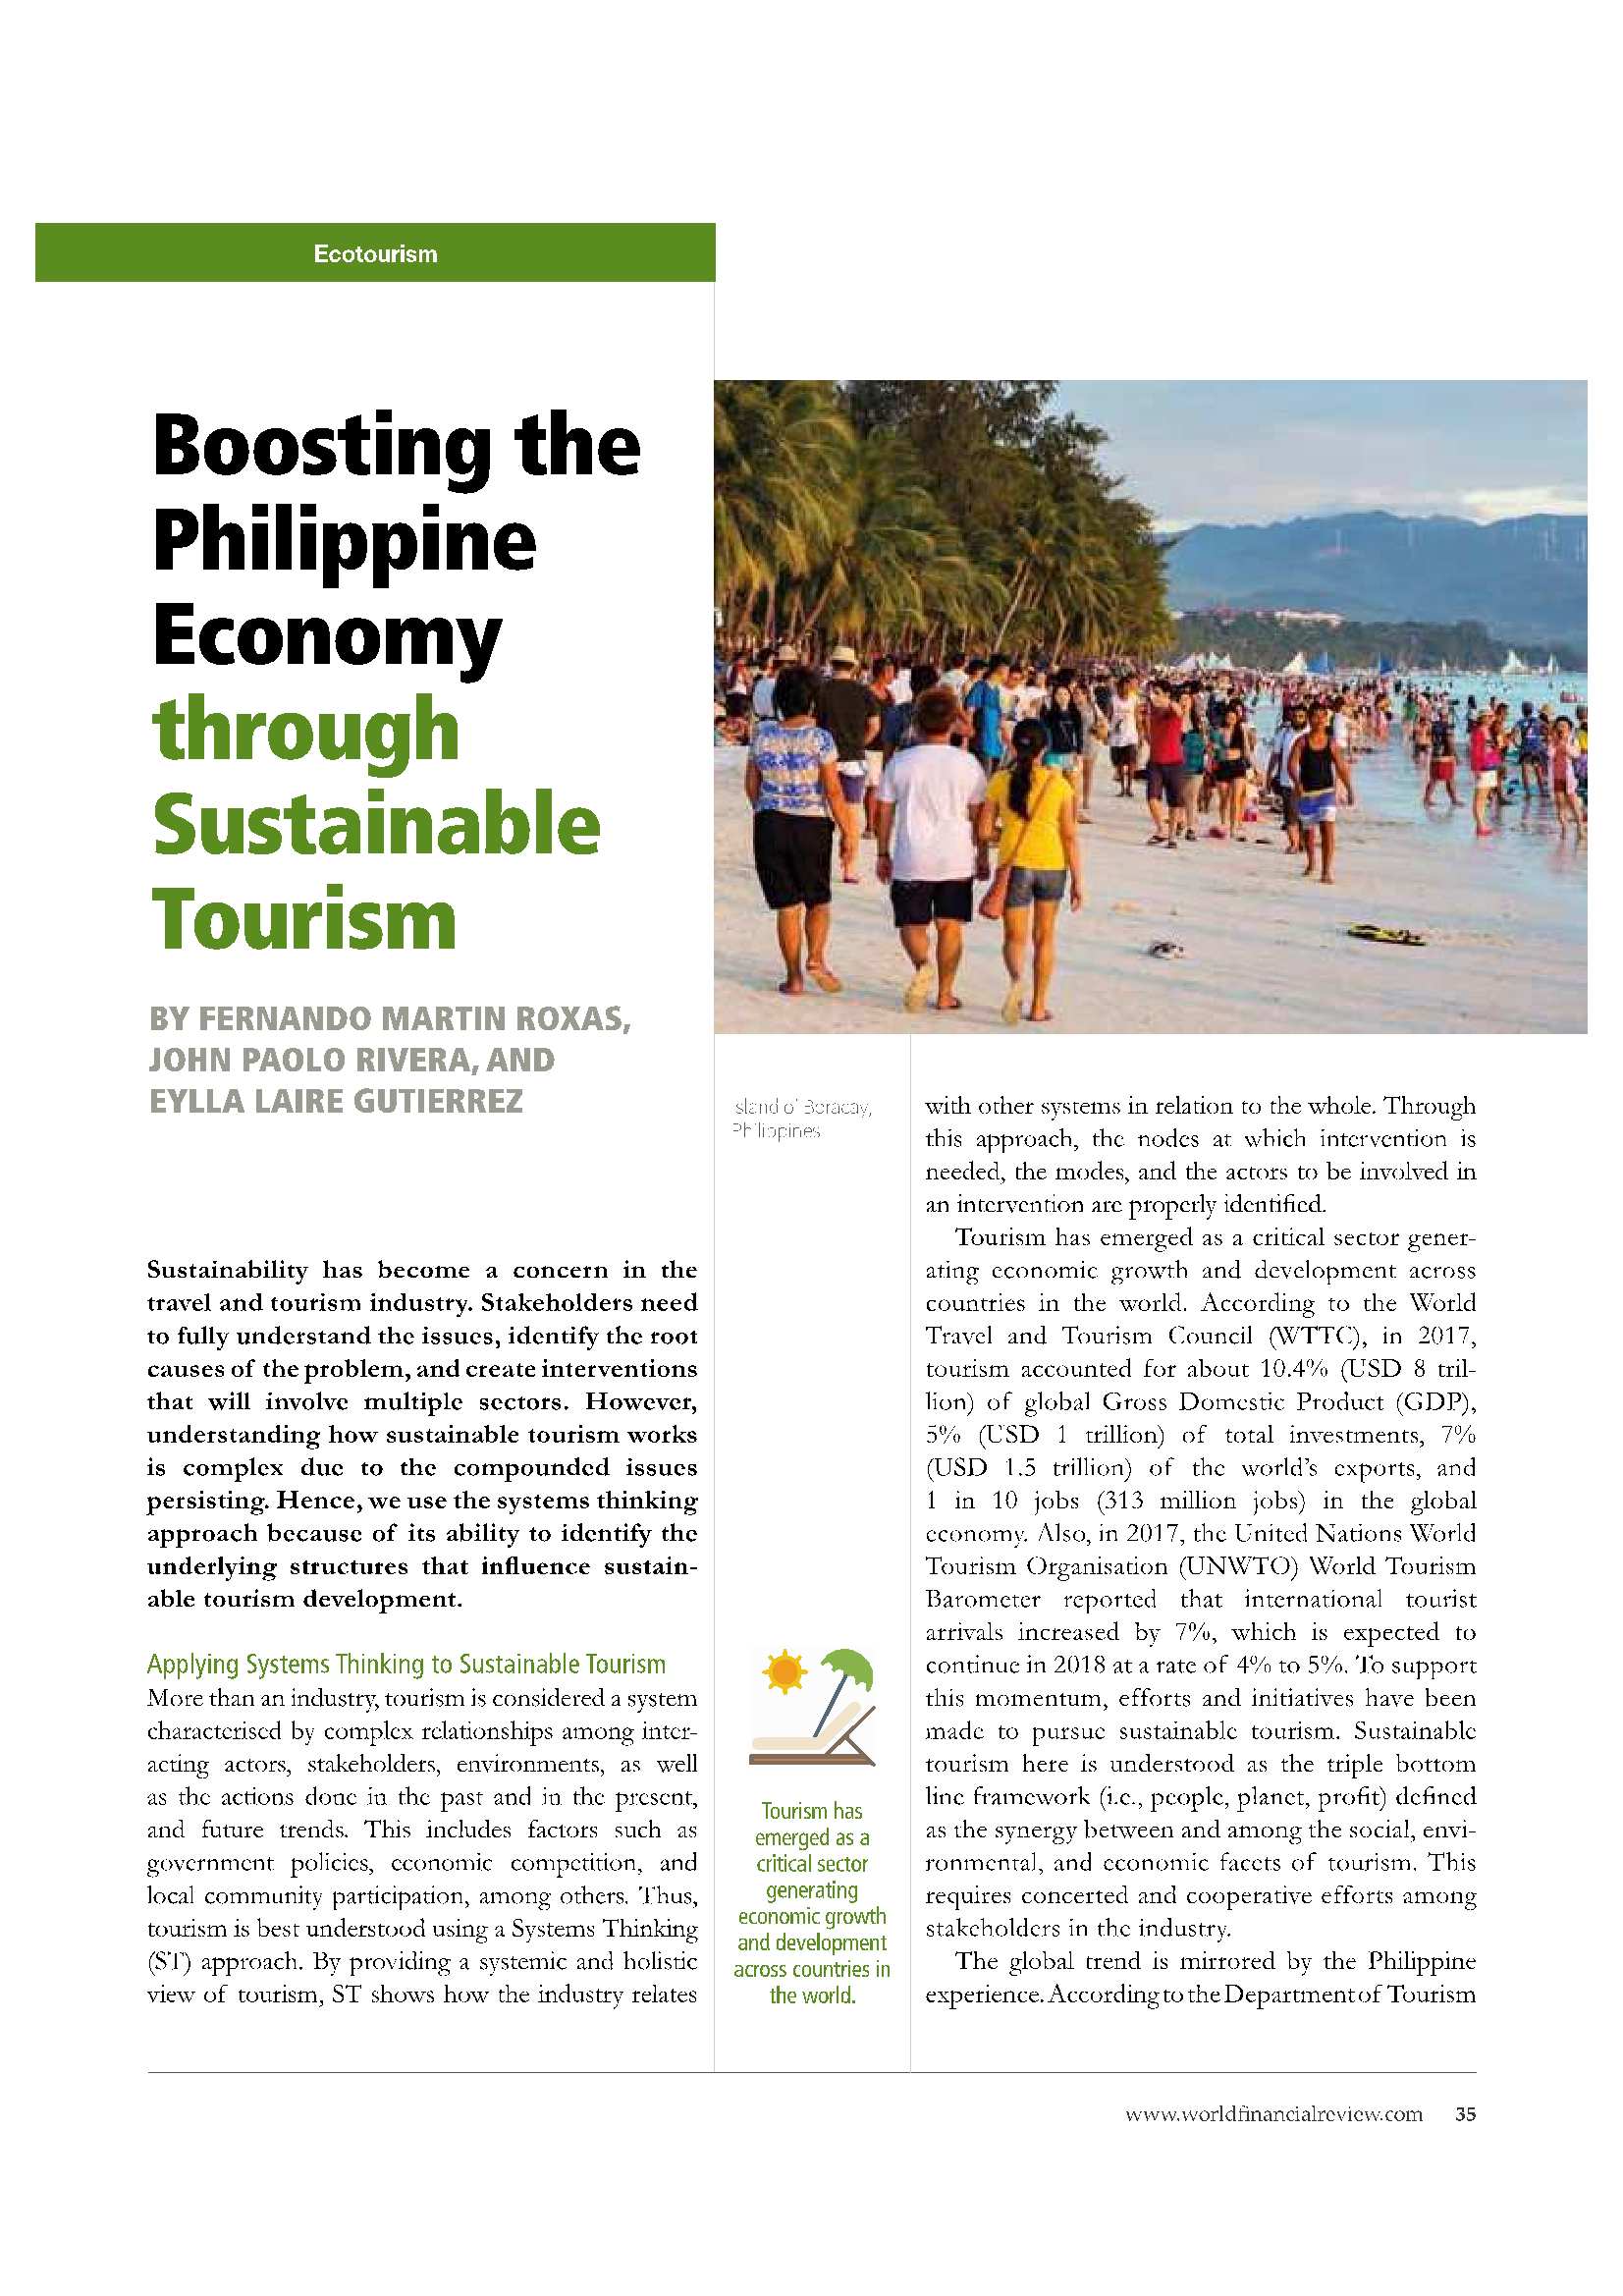 research topics about tourism industry in the philippines